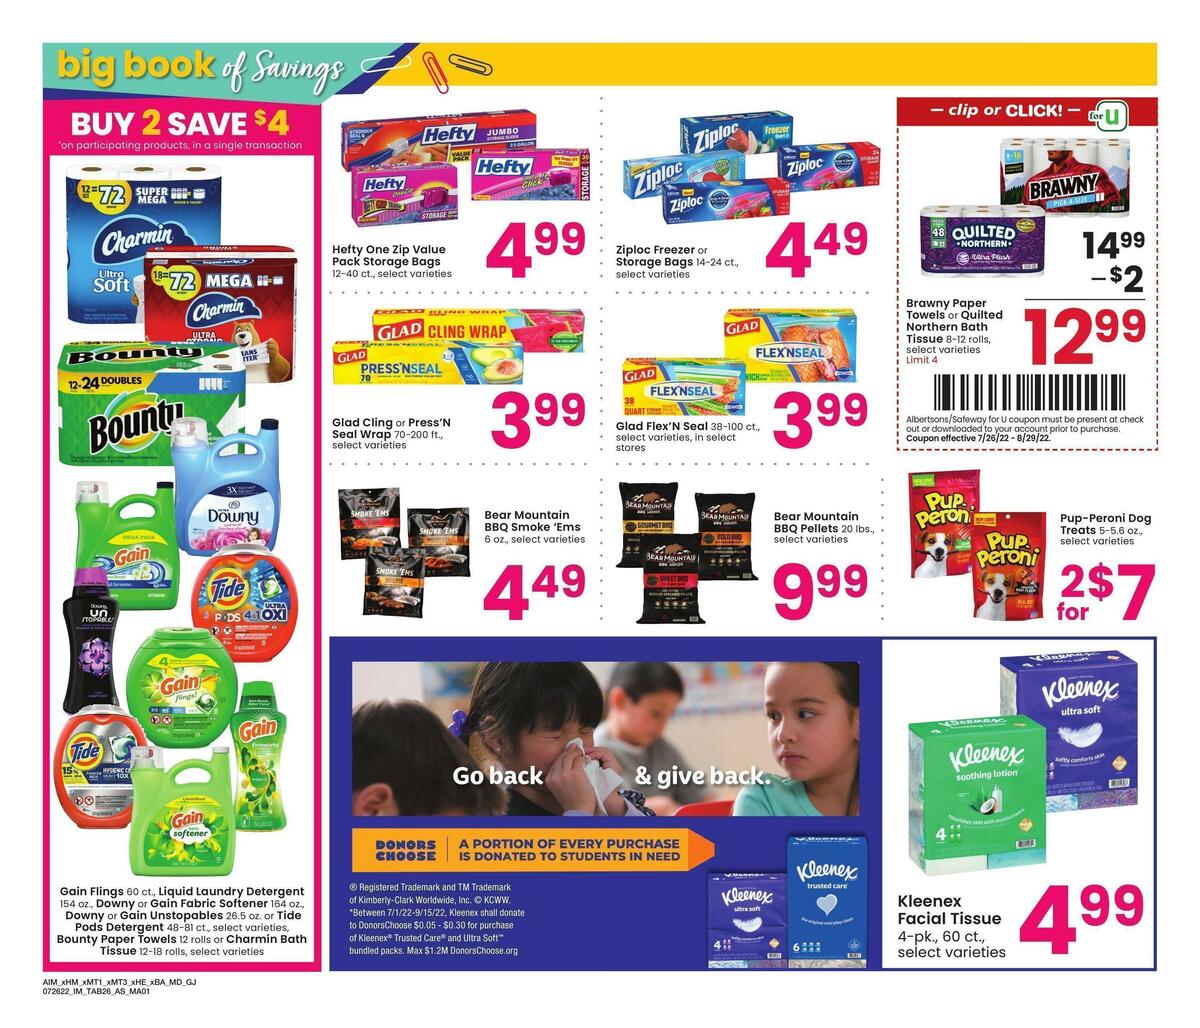 Albertsons Big Book of Savings Weekly Ad from July 26